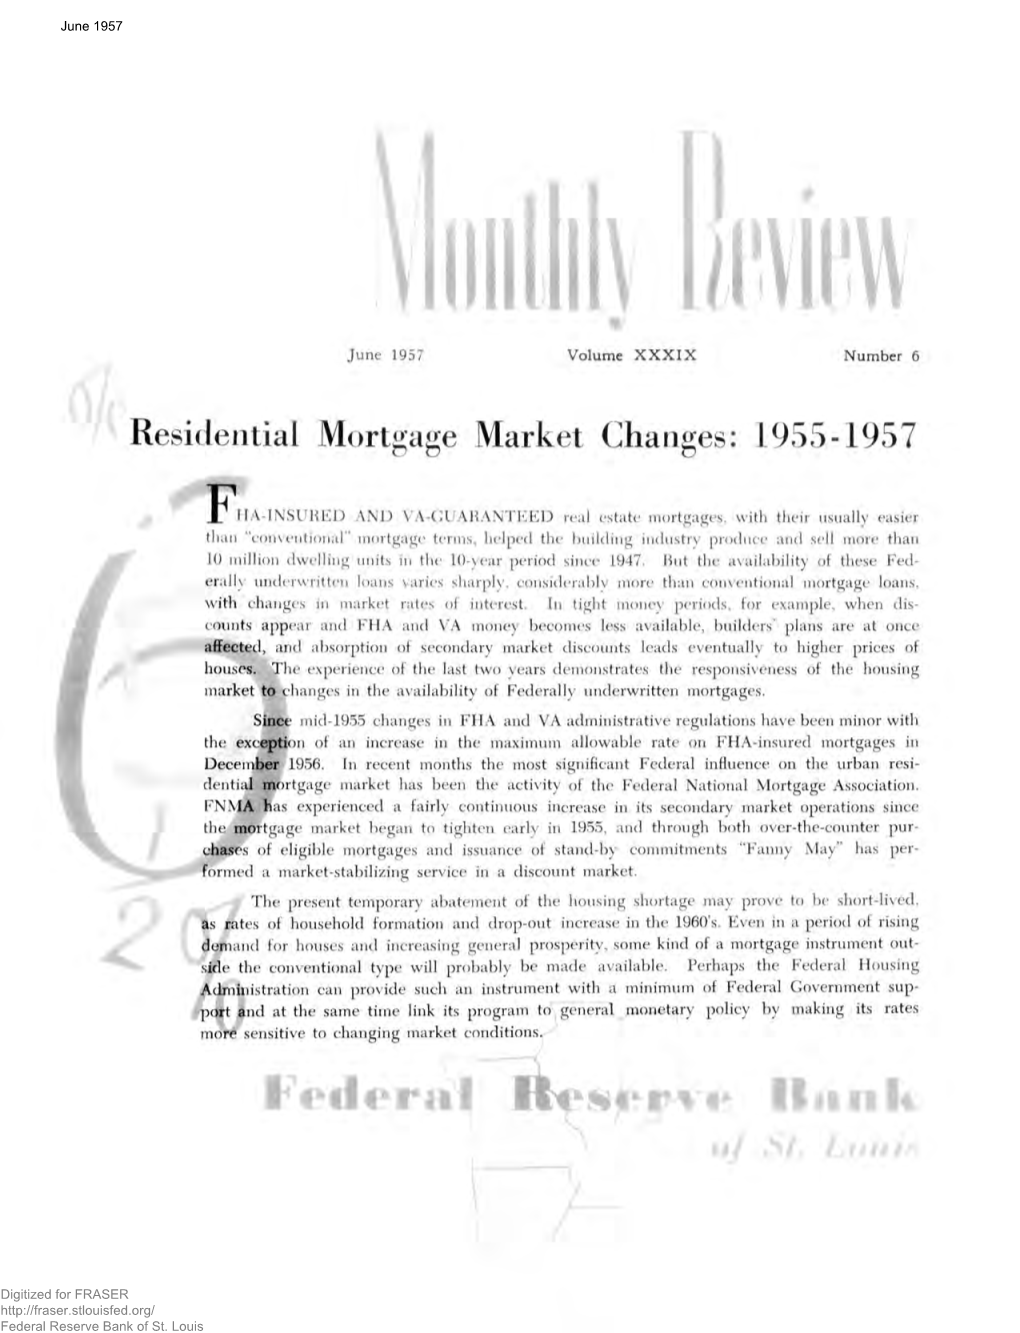 Residential Mortgage Market Changes, 1955-1957